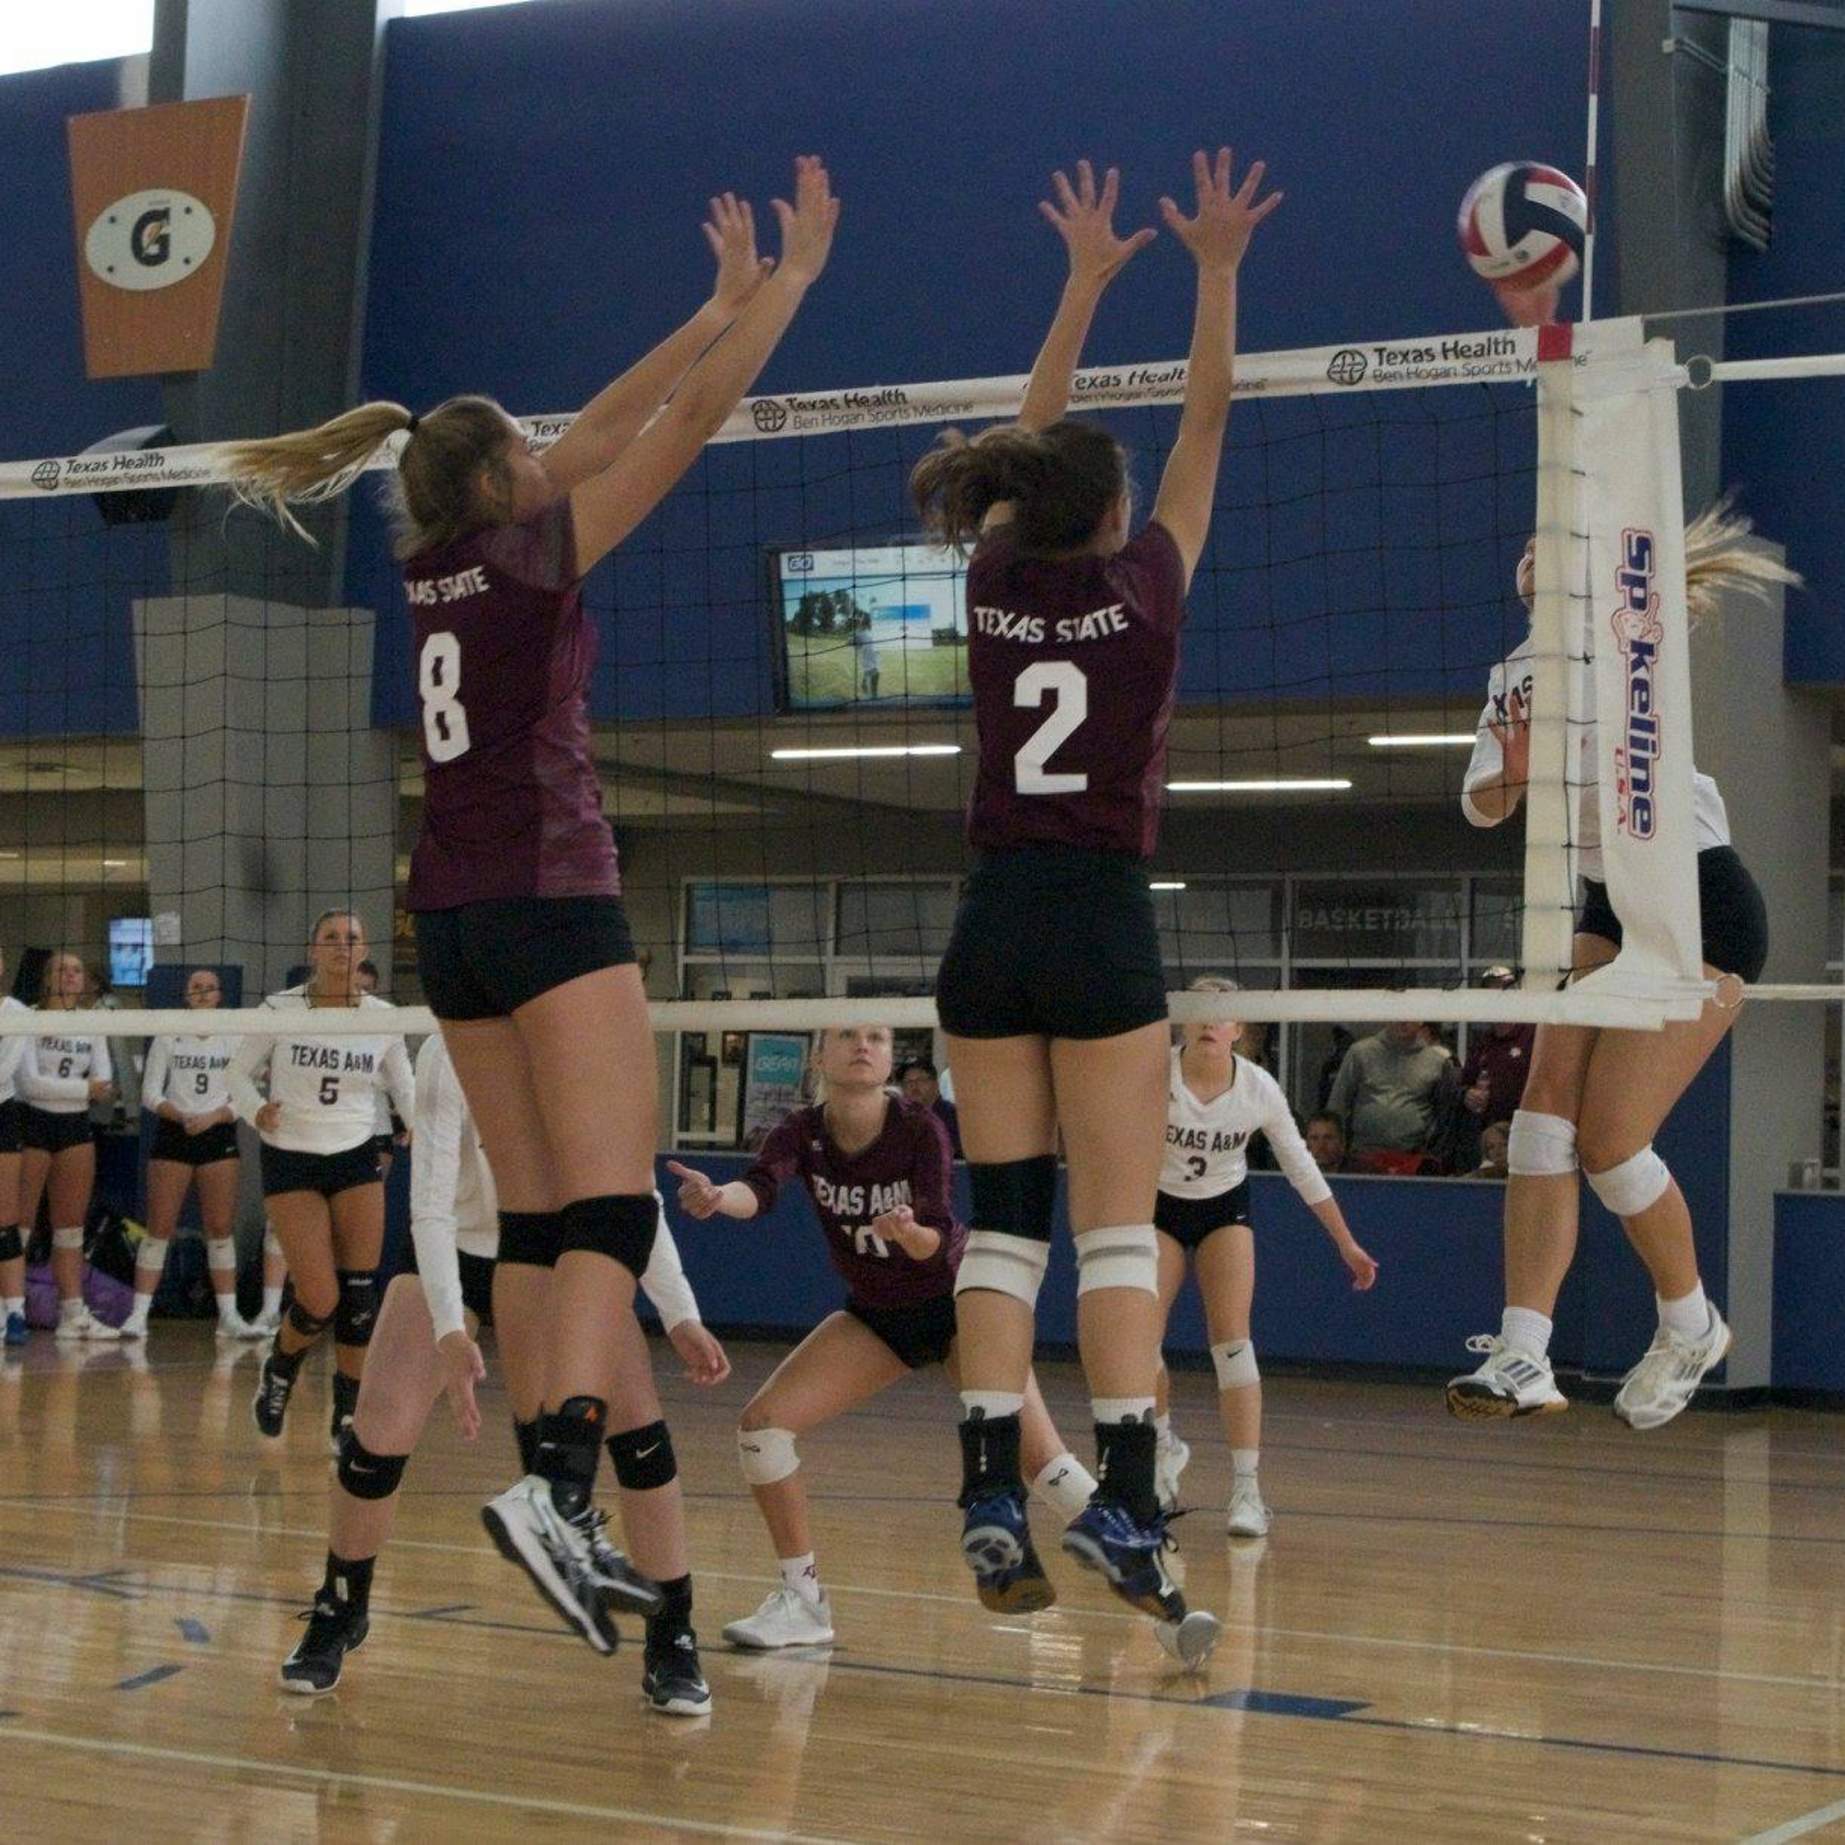 Women's Volleyball players attempt a block